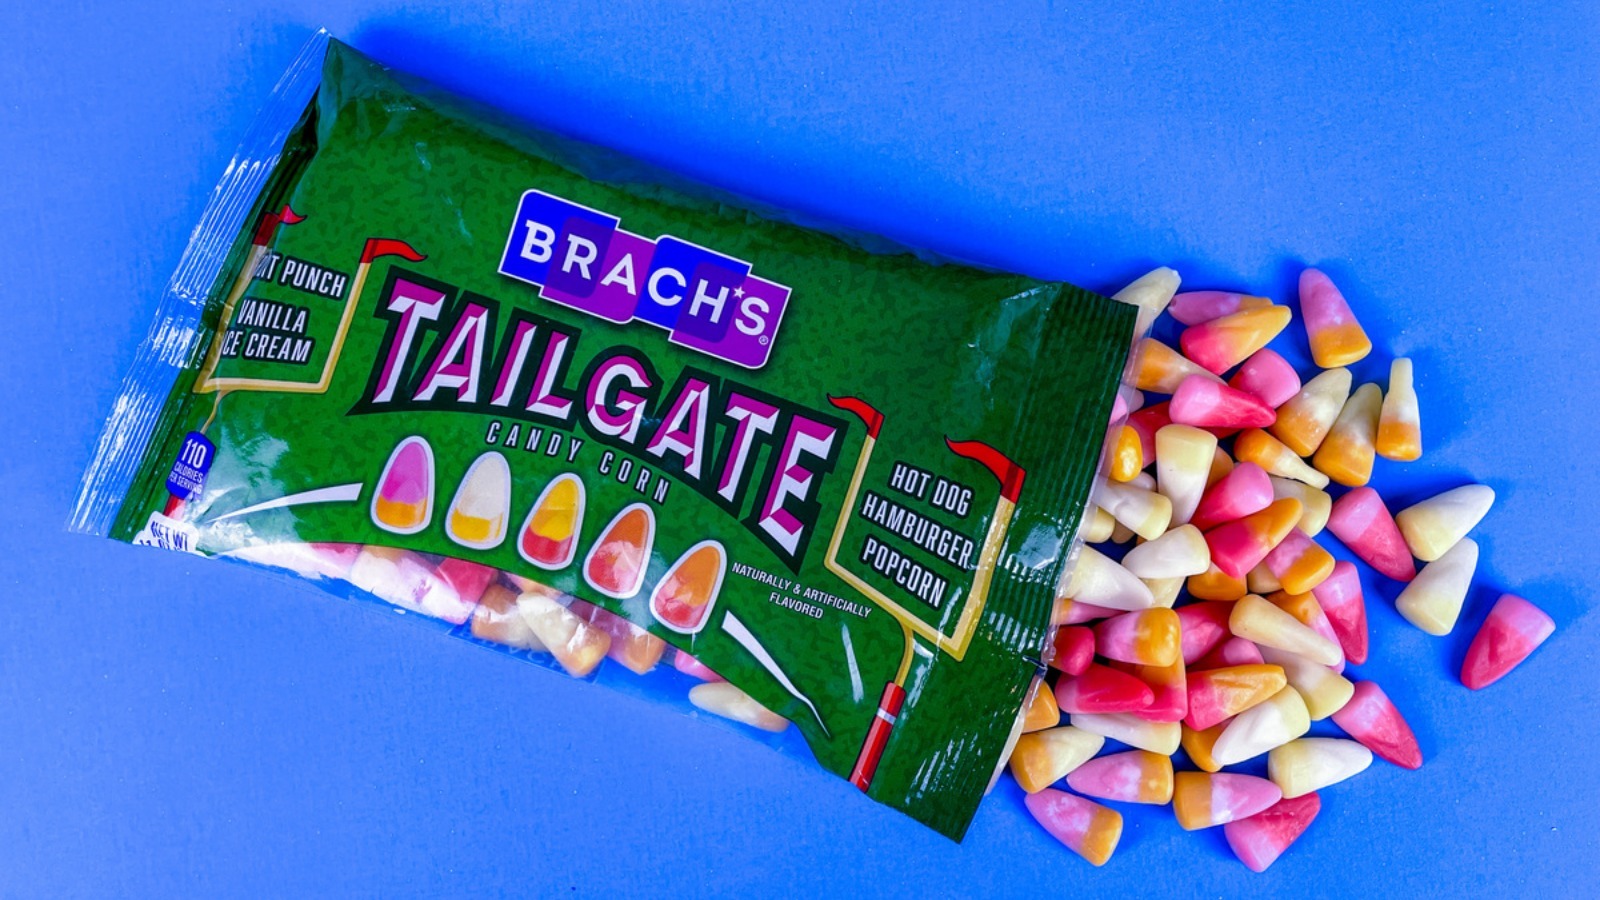 We Tried Brach's Tailgate Hot Dog And Hamburger Candy Corn So You Don't  Have To